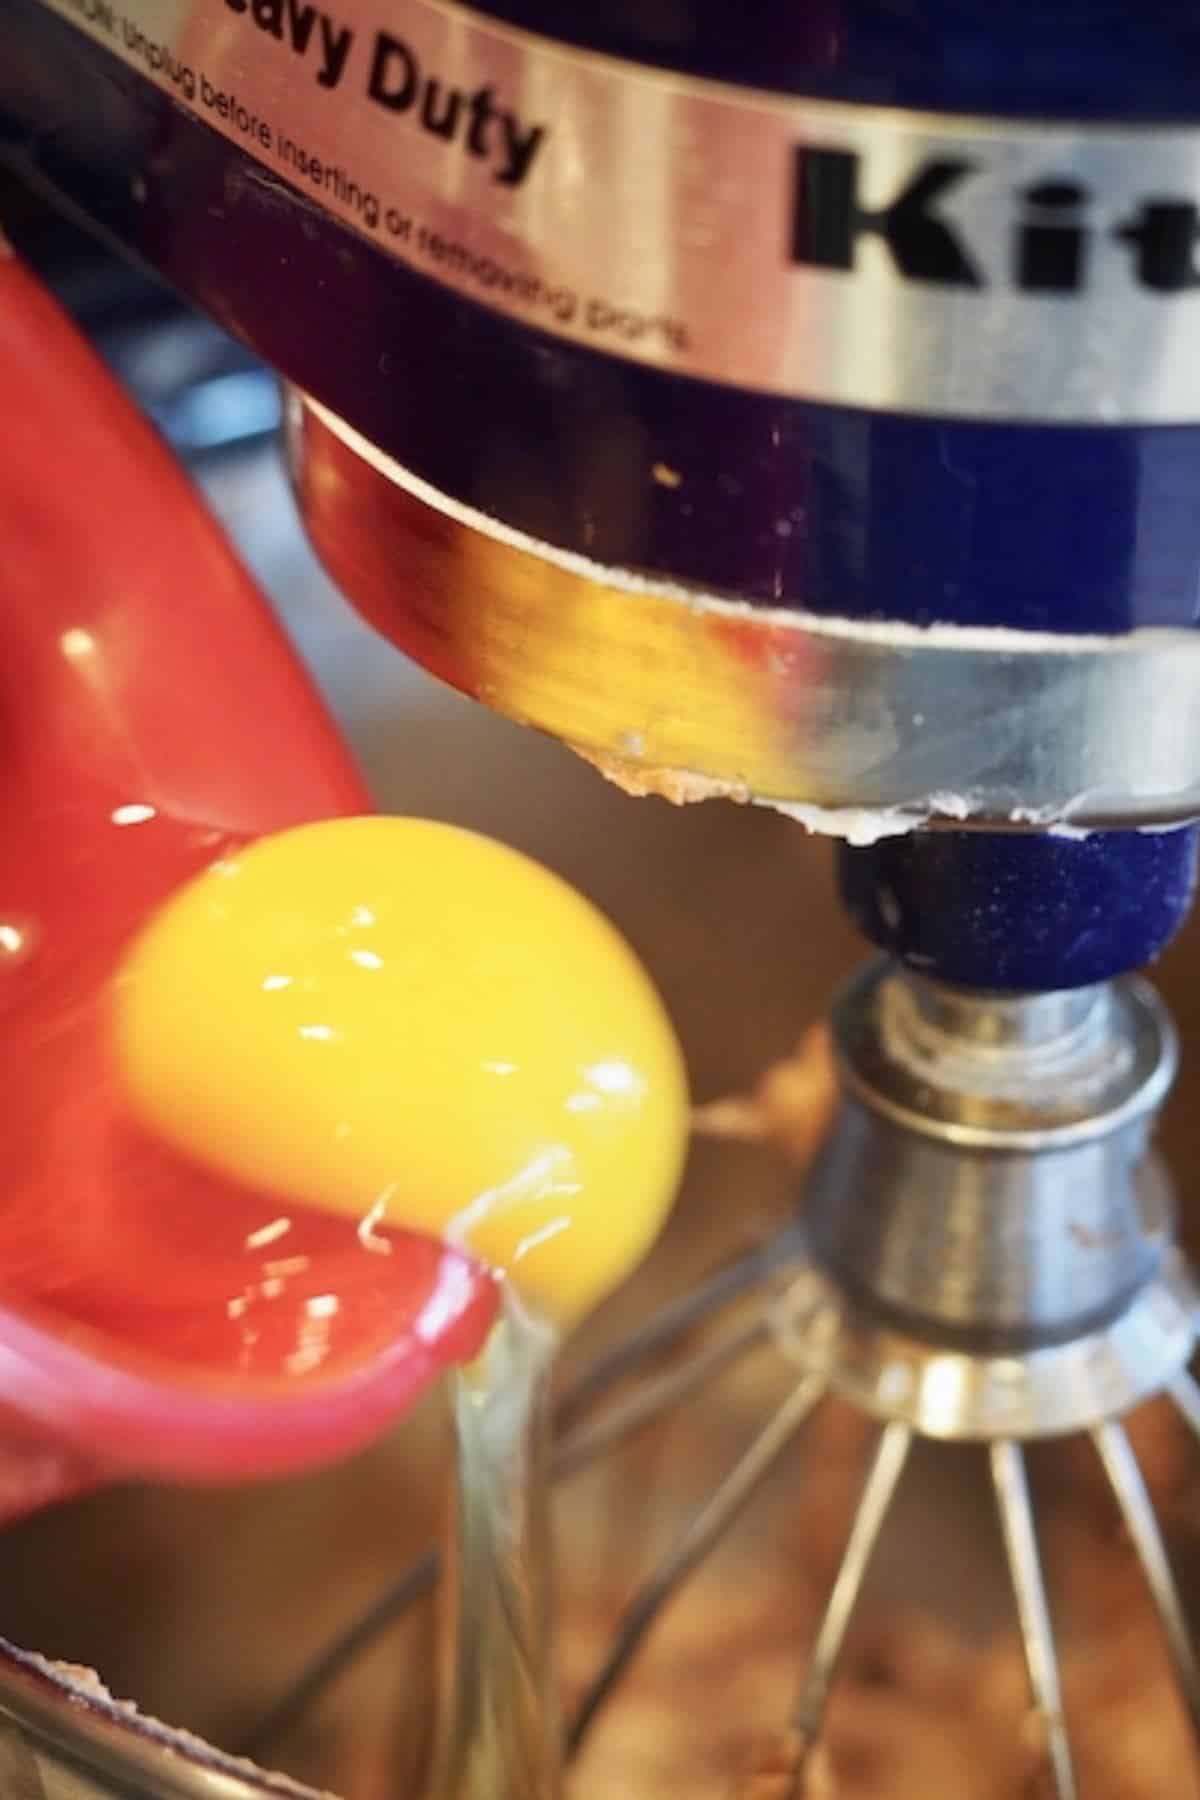 Add egg one at a time and whisk 5 minutes per egg.